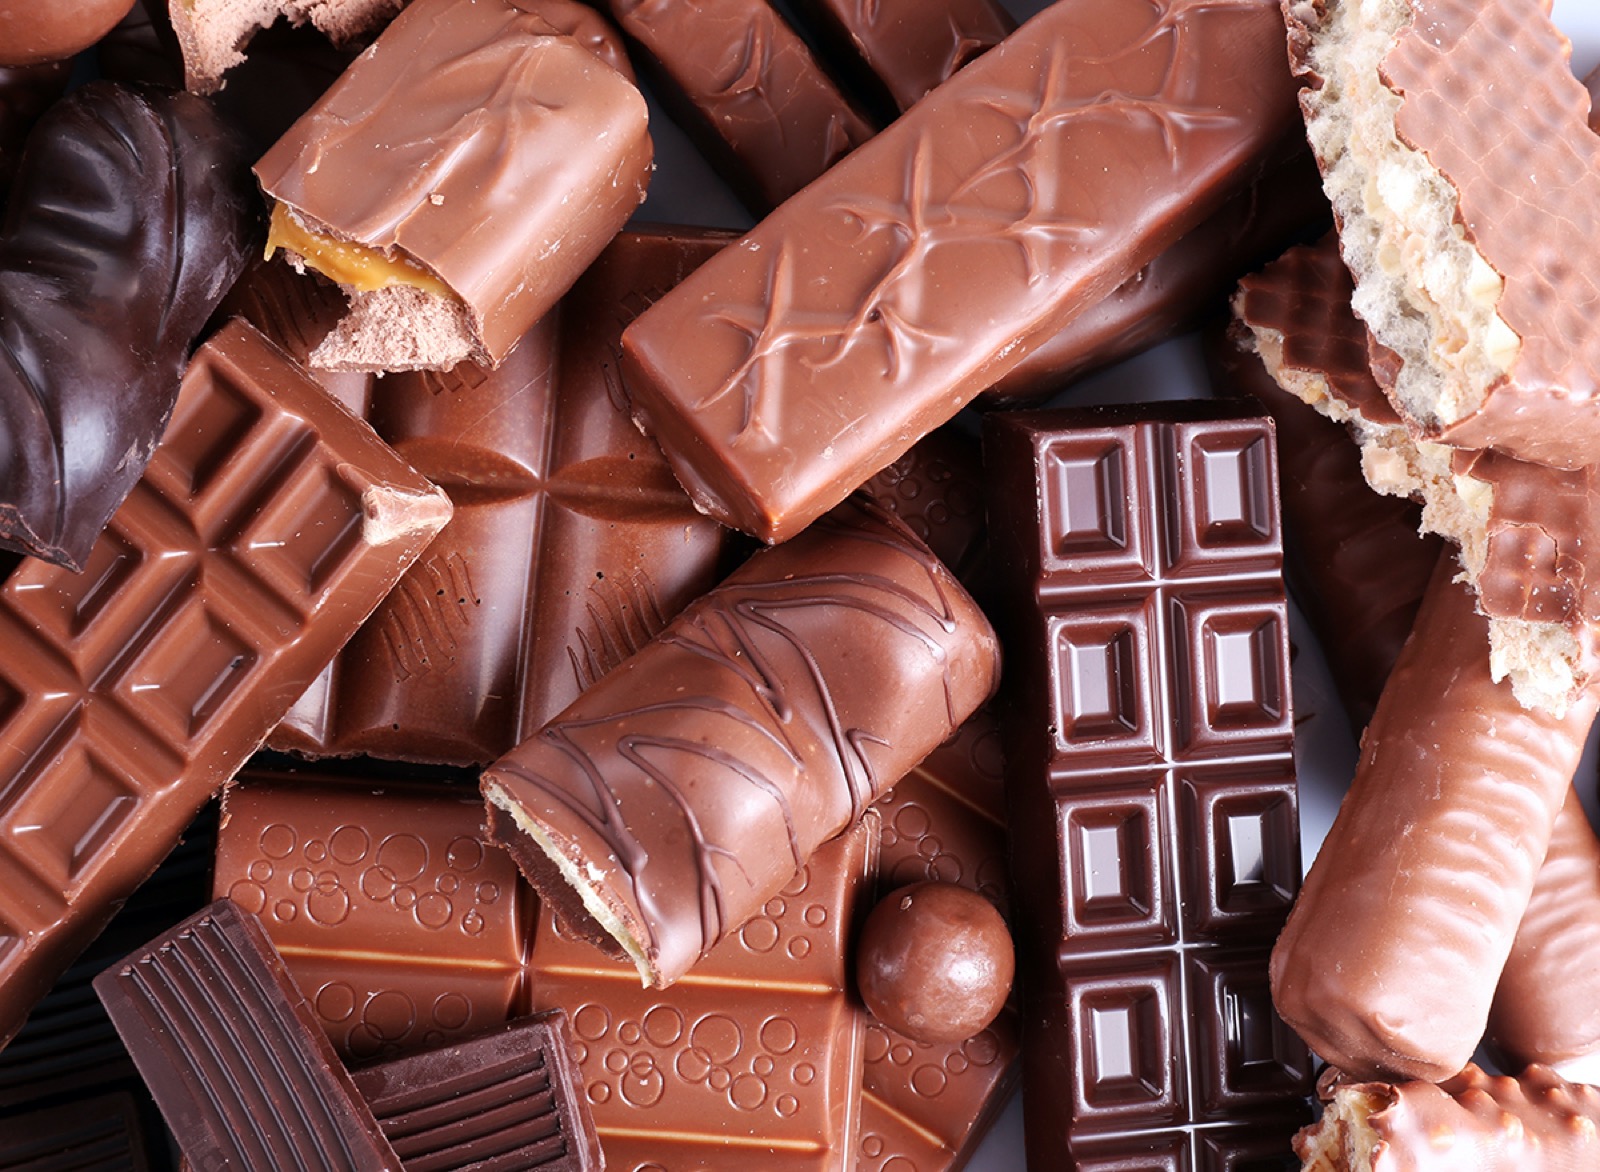 Are You an Older or Younger Person? 🥨 Choose Some Typical Snacks and We’ll Guess Chocolate Candy Bars